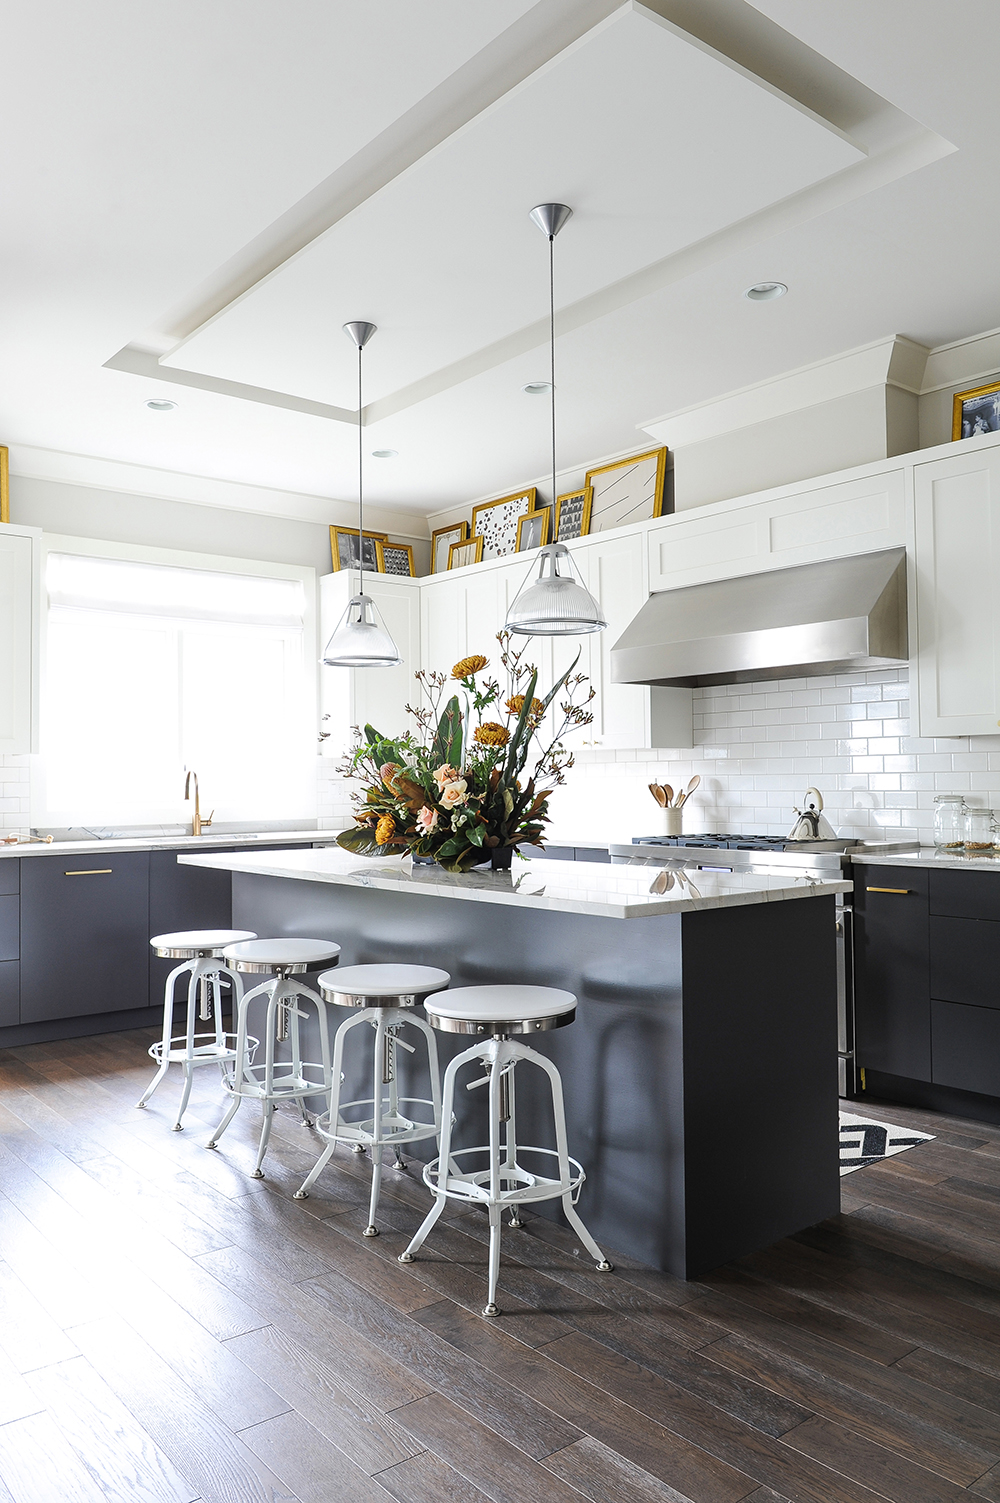 A bright white kitchen with grey cabinetry and gold accents.